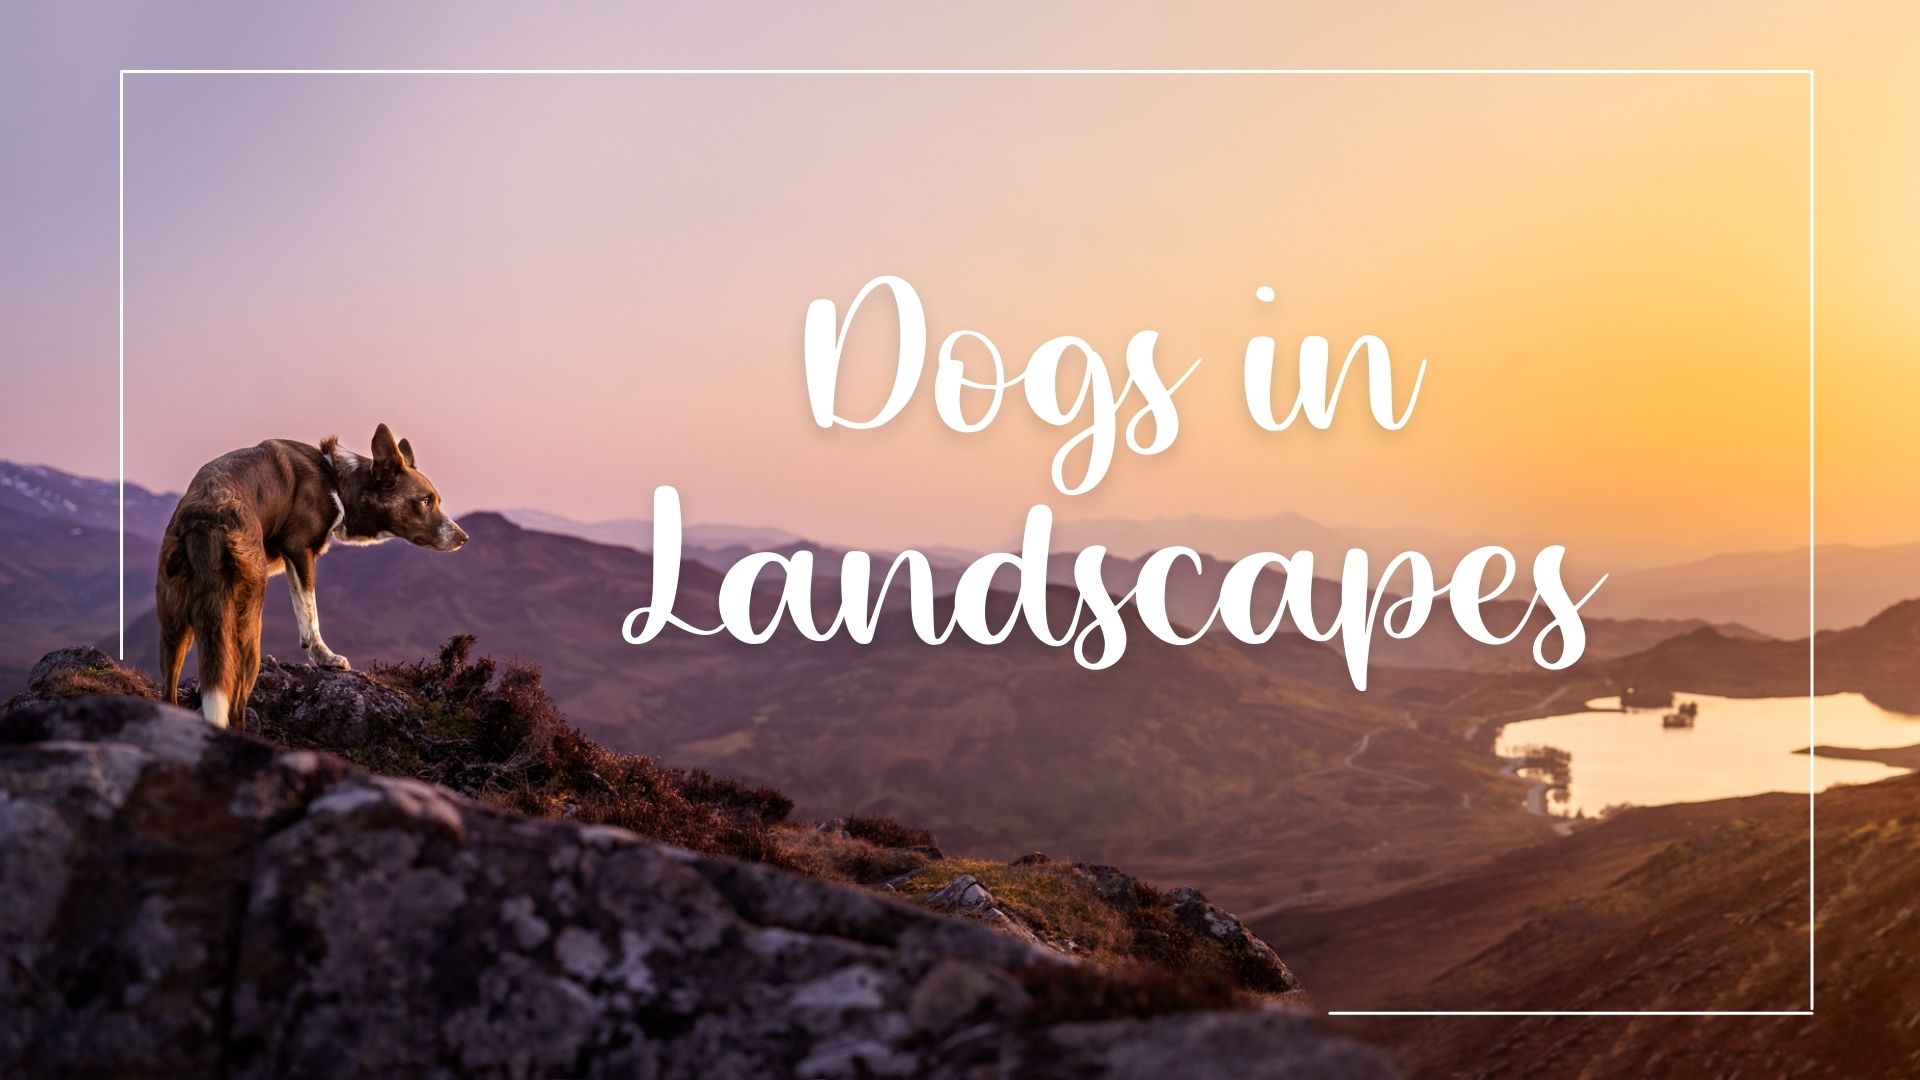 How To: Dogs in Landscapes